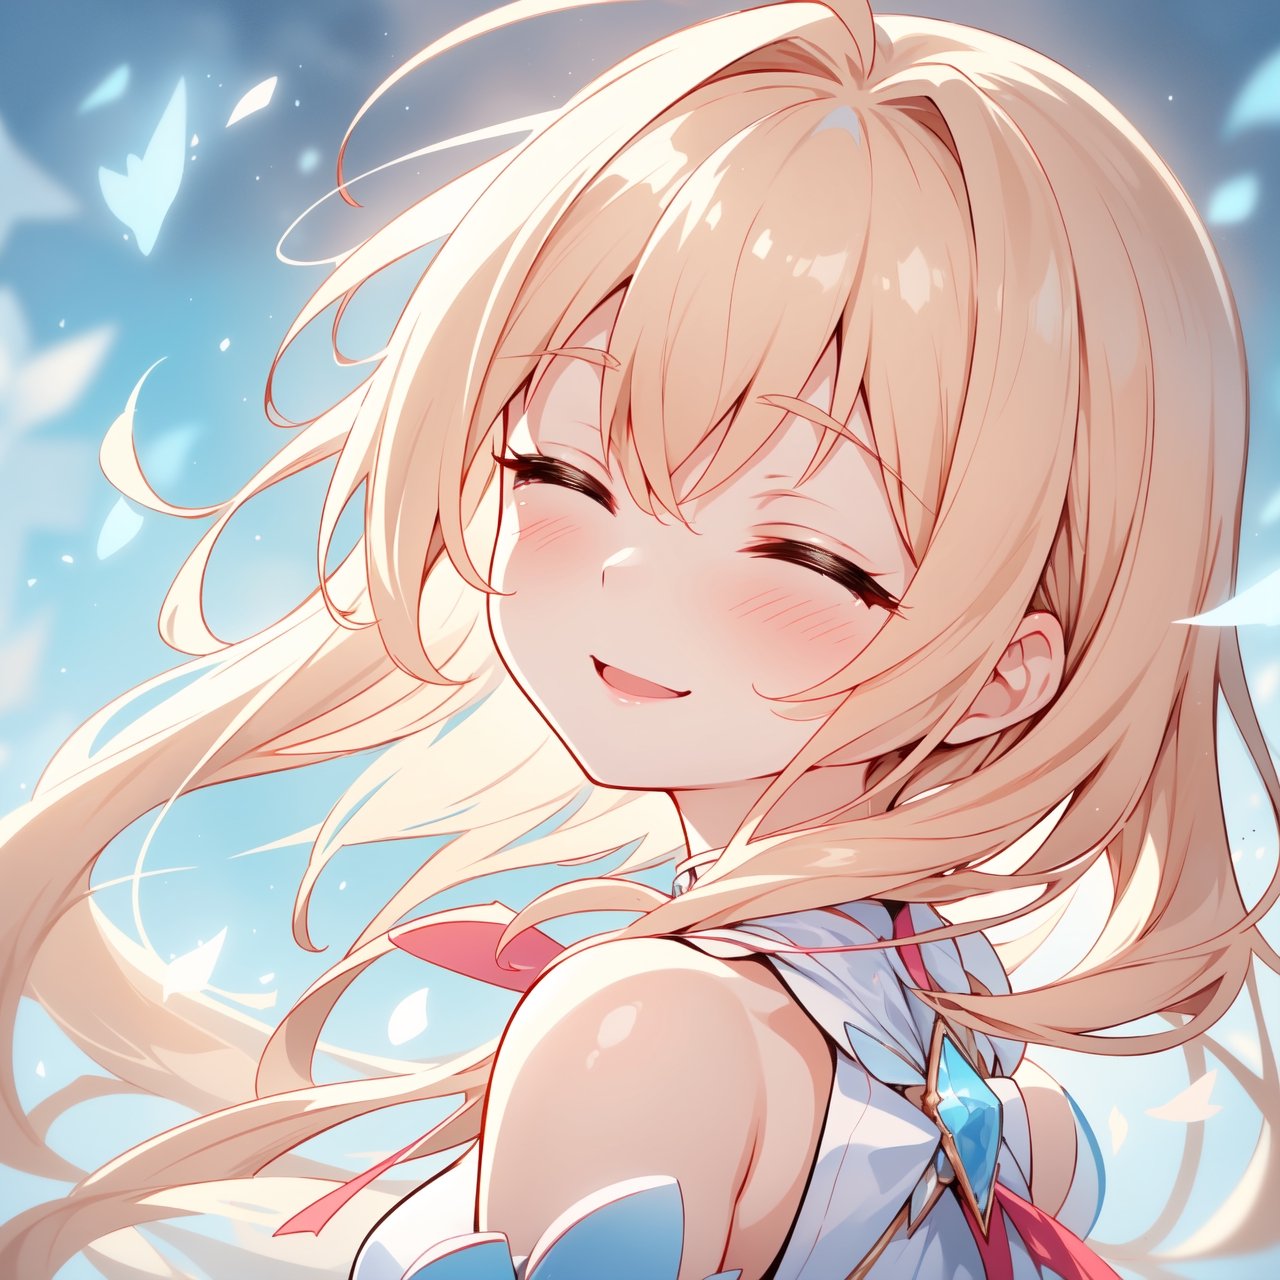 In this close-up portrait, the anime girl stands in a moment frozen in time, head tilted slightly upward and turned back, creating an endearing pose. With her body facing forward, she rotates her neck to glance over her shoulder, a playful and joyful expression adorning her face. Her head turns enough to reveal about half of her face, offering a glimpse of her enchanting smile and closed eyes that convey pure happiness.

The animation of her turning to look back captures the essence of someone being called from behind, responding with delight and anticipation. Her cheeks are delicately flushed with a rosy blush, adding a touch of warmth to her already beaming countenance.

This super-close portrait centers on the intimate moment of her looking back, encapsulating the excitement and happiness of being called by someone she cherishes. The focus remains on her joyful expression, capturing the subtle yet captivating emotions of the fleeting moment.